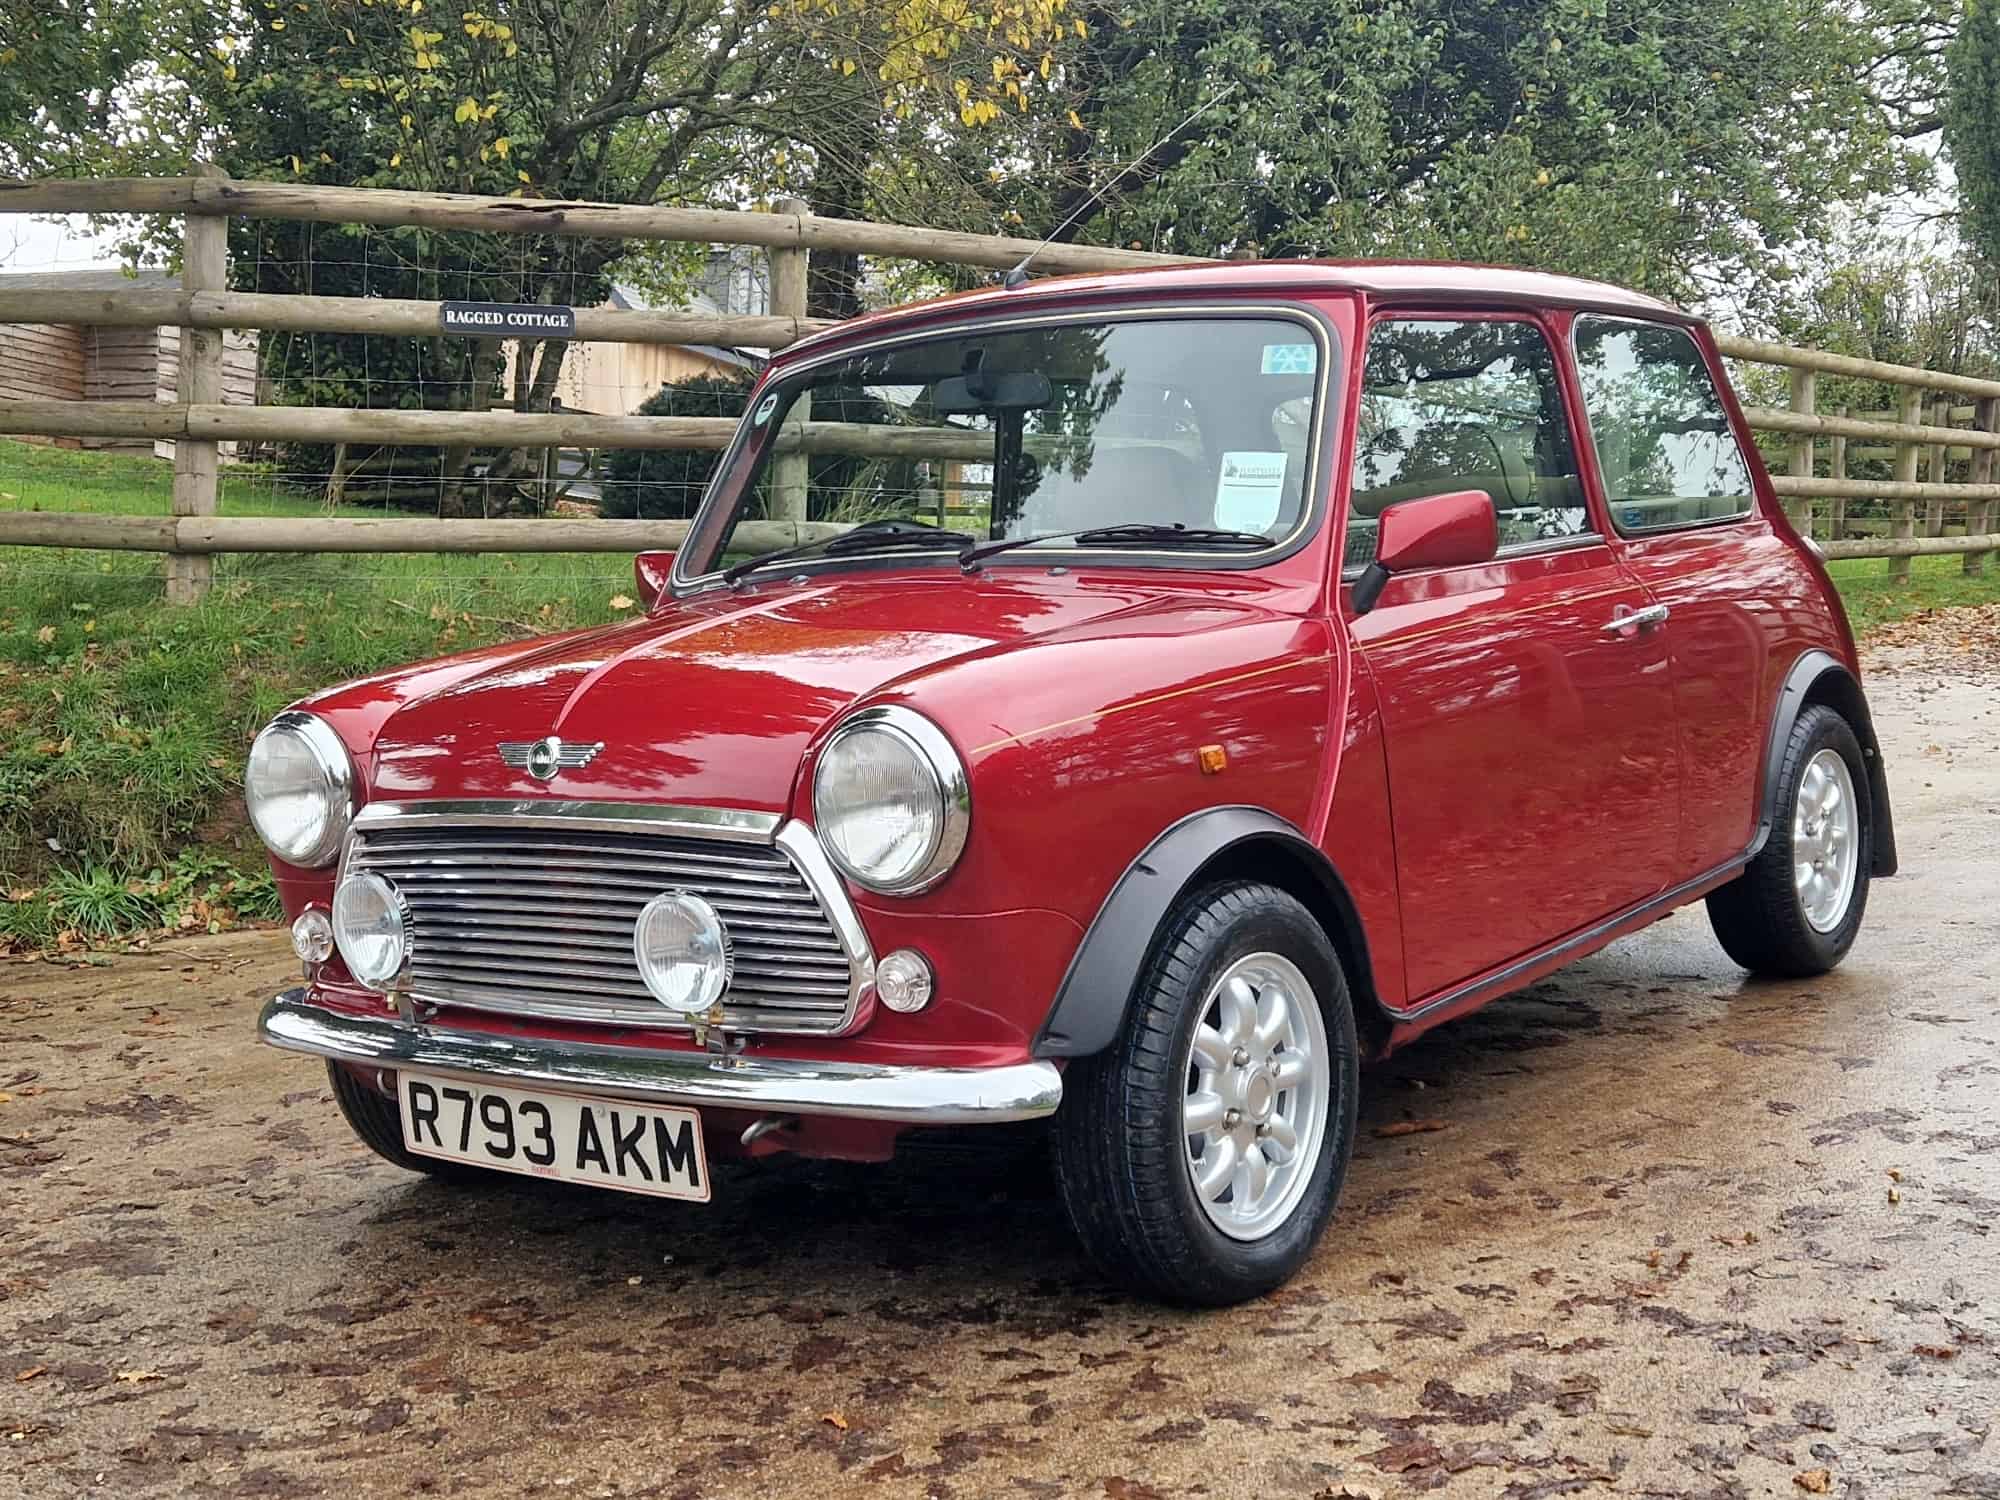 ** NOW SOLD ** 1997 Rover Mini 1.3 MPI In Nightfire Red On Just 5880 Miles From New!